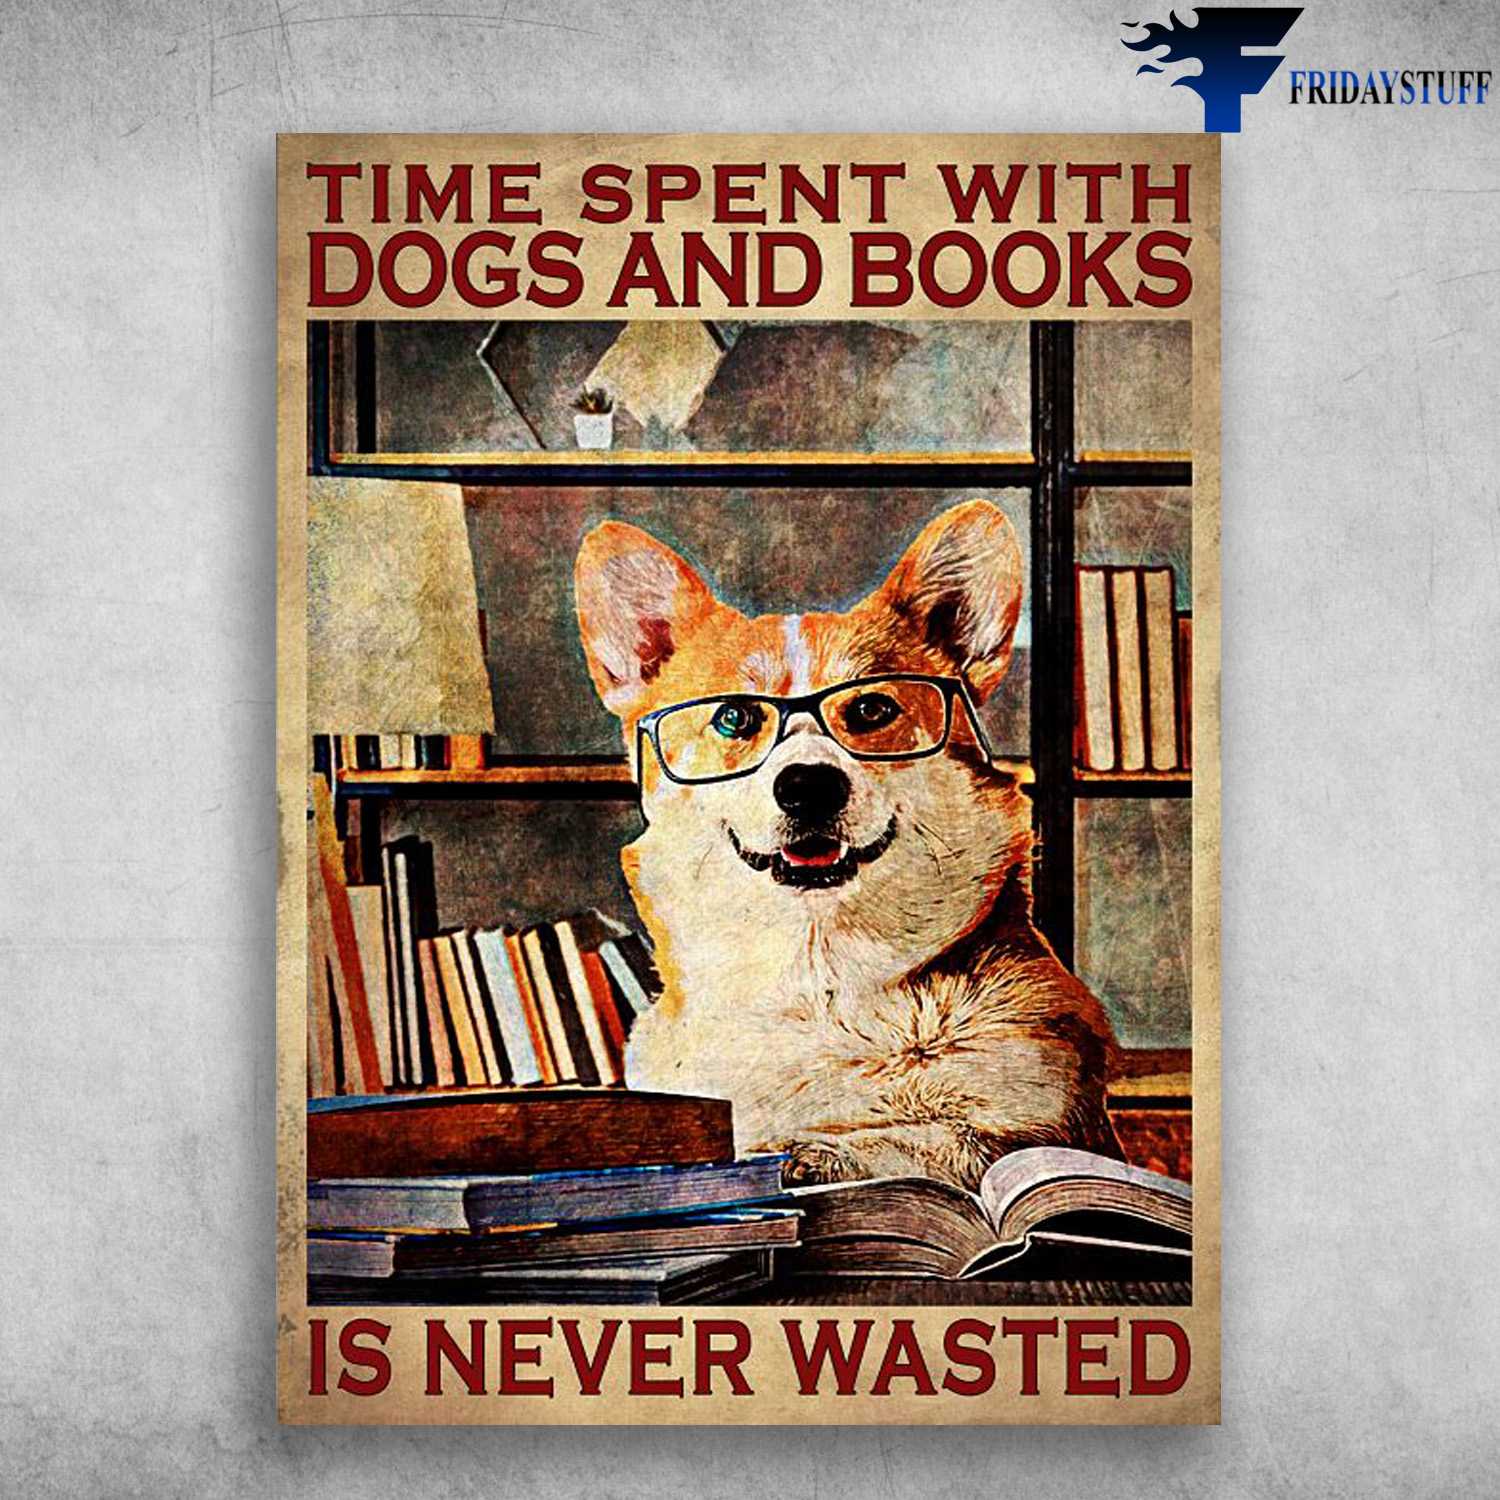 Corgi Dog, Book And Dog - Time Spent With Dogs And Books, Is Never Wasted